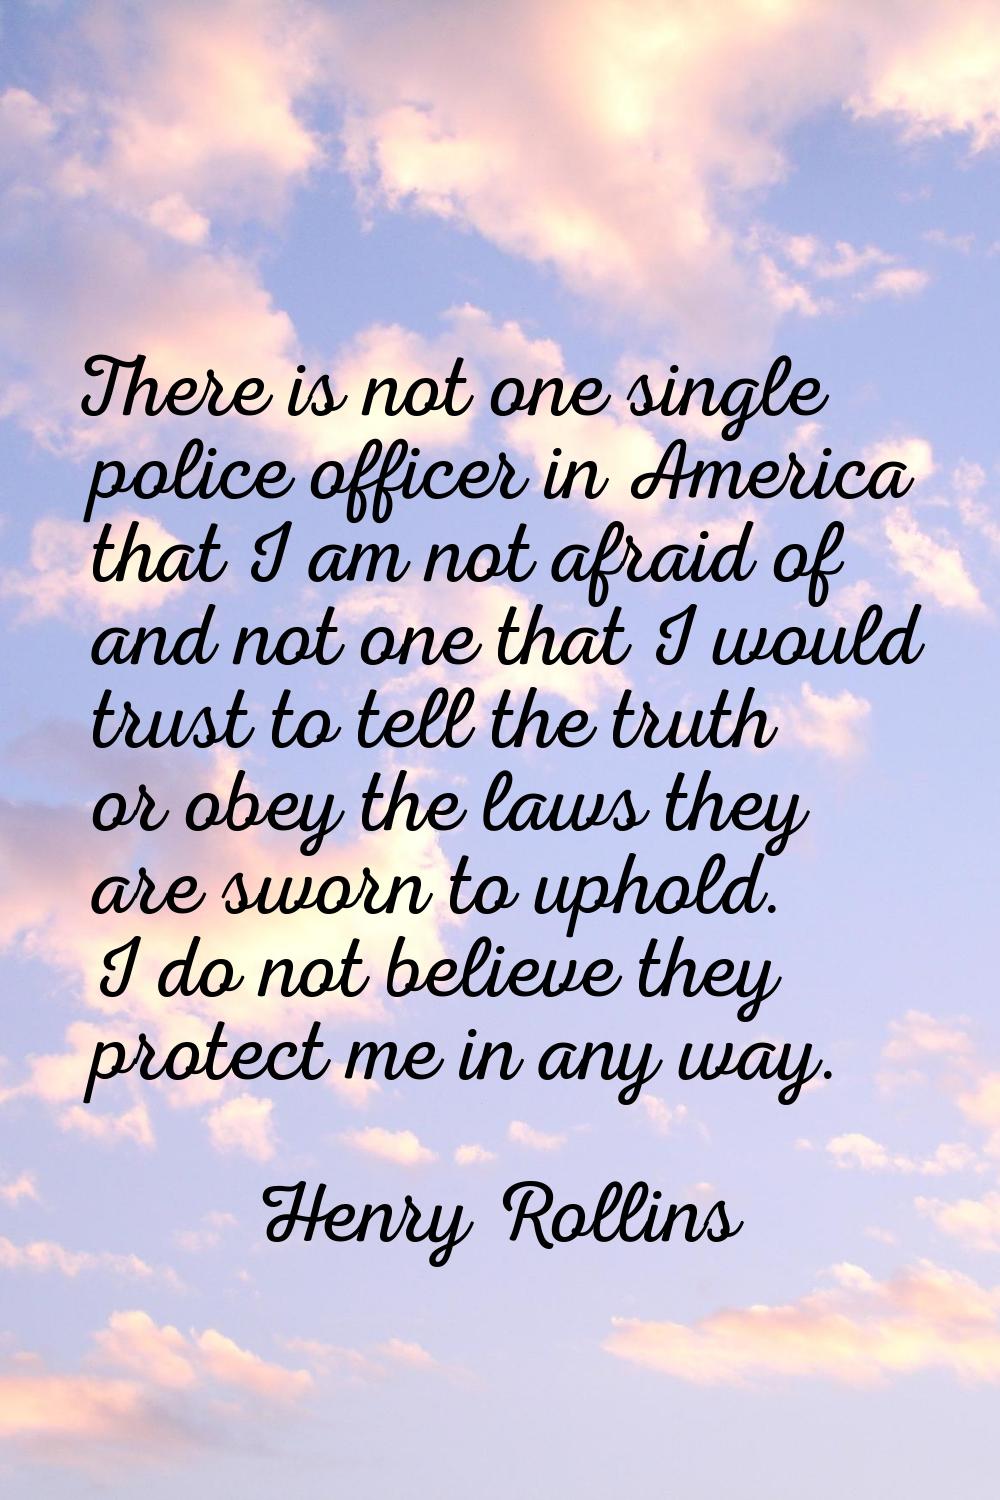 There is not one single police officer in America that I am not afraid of and not one that I would 